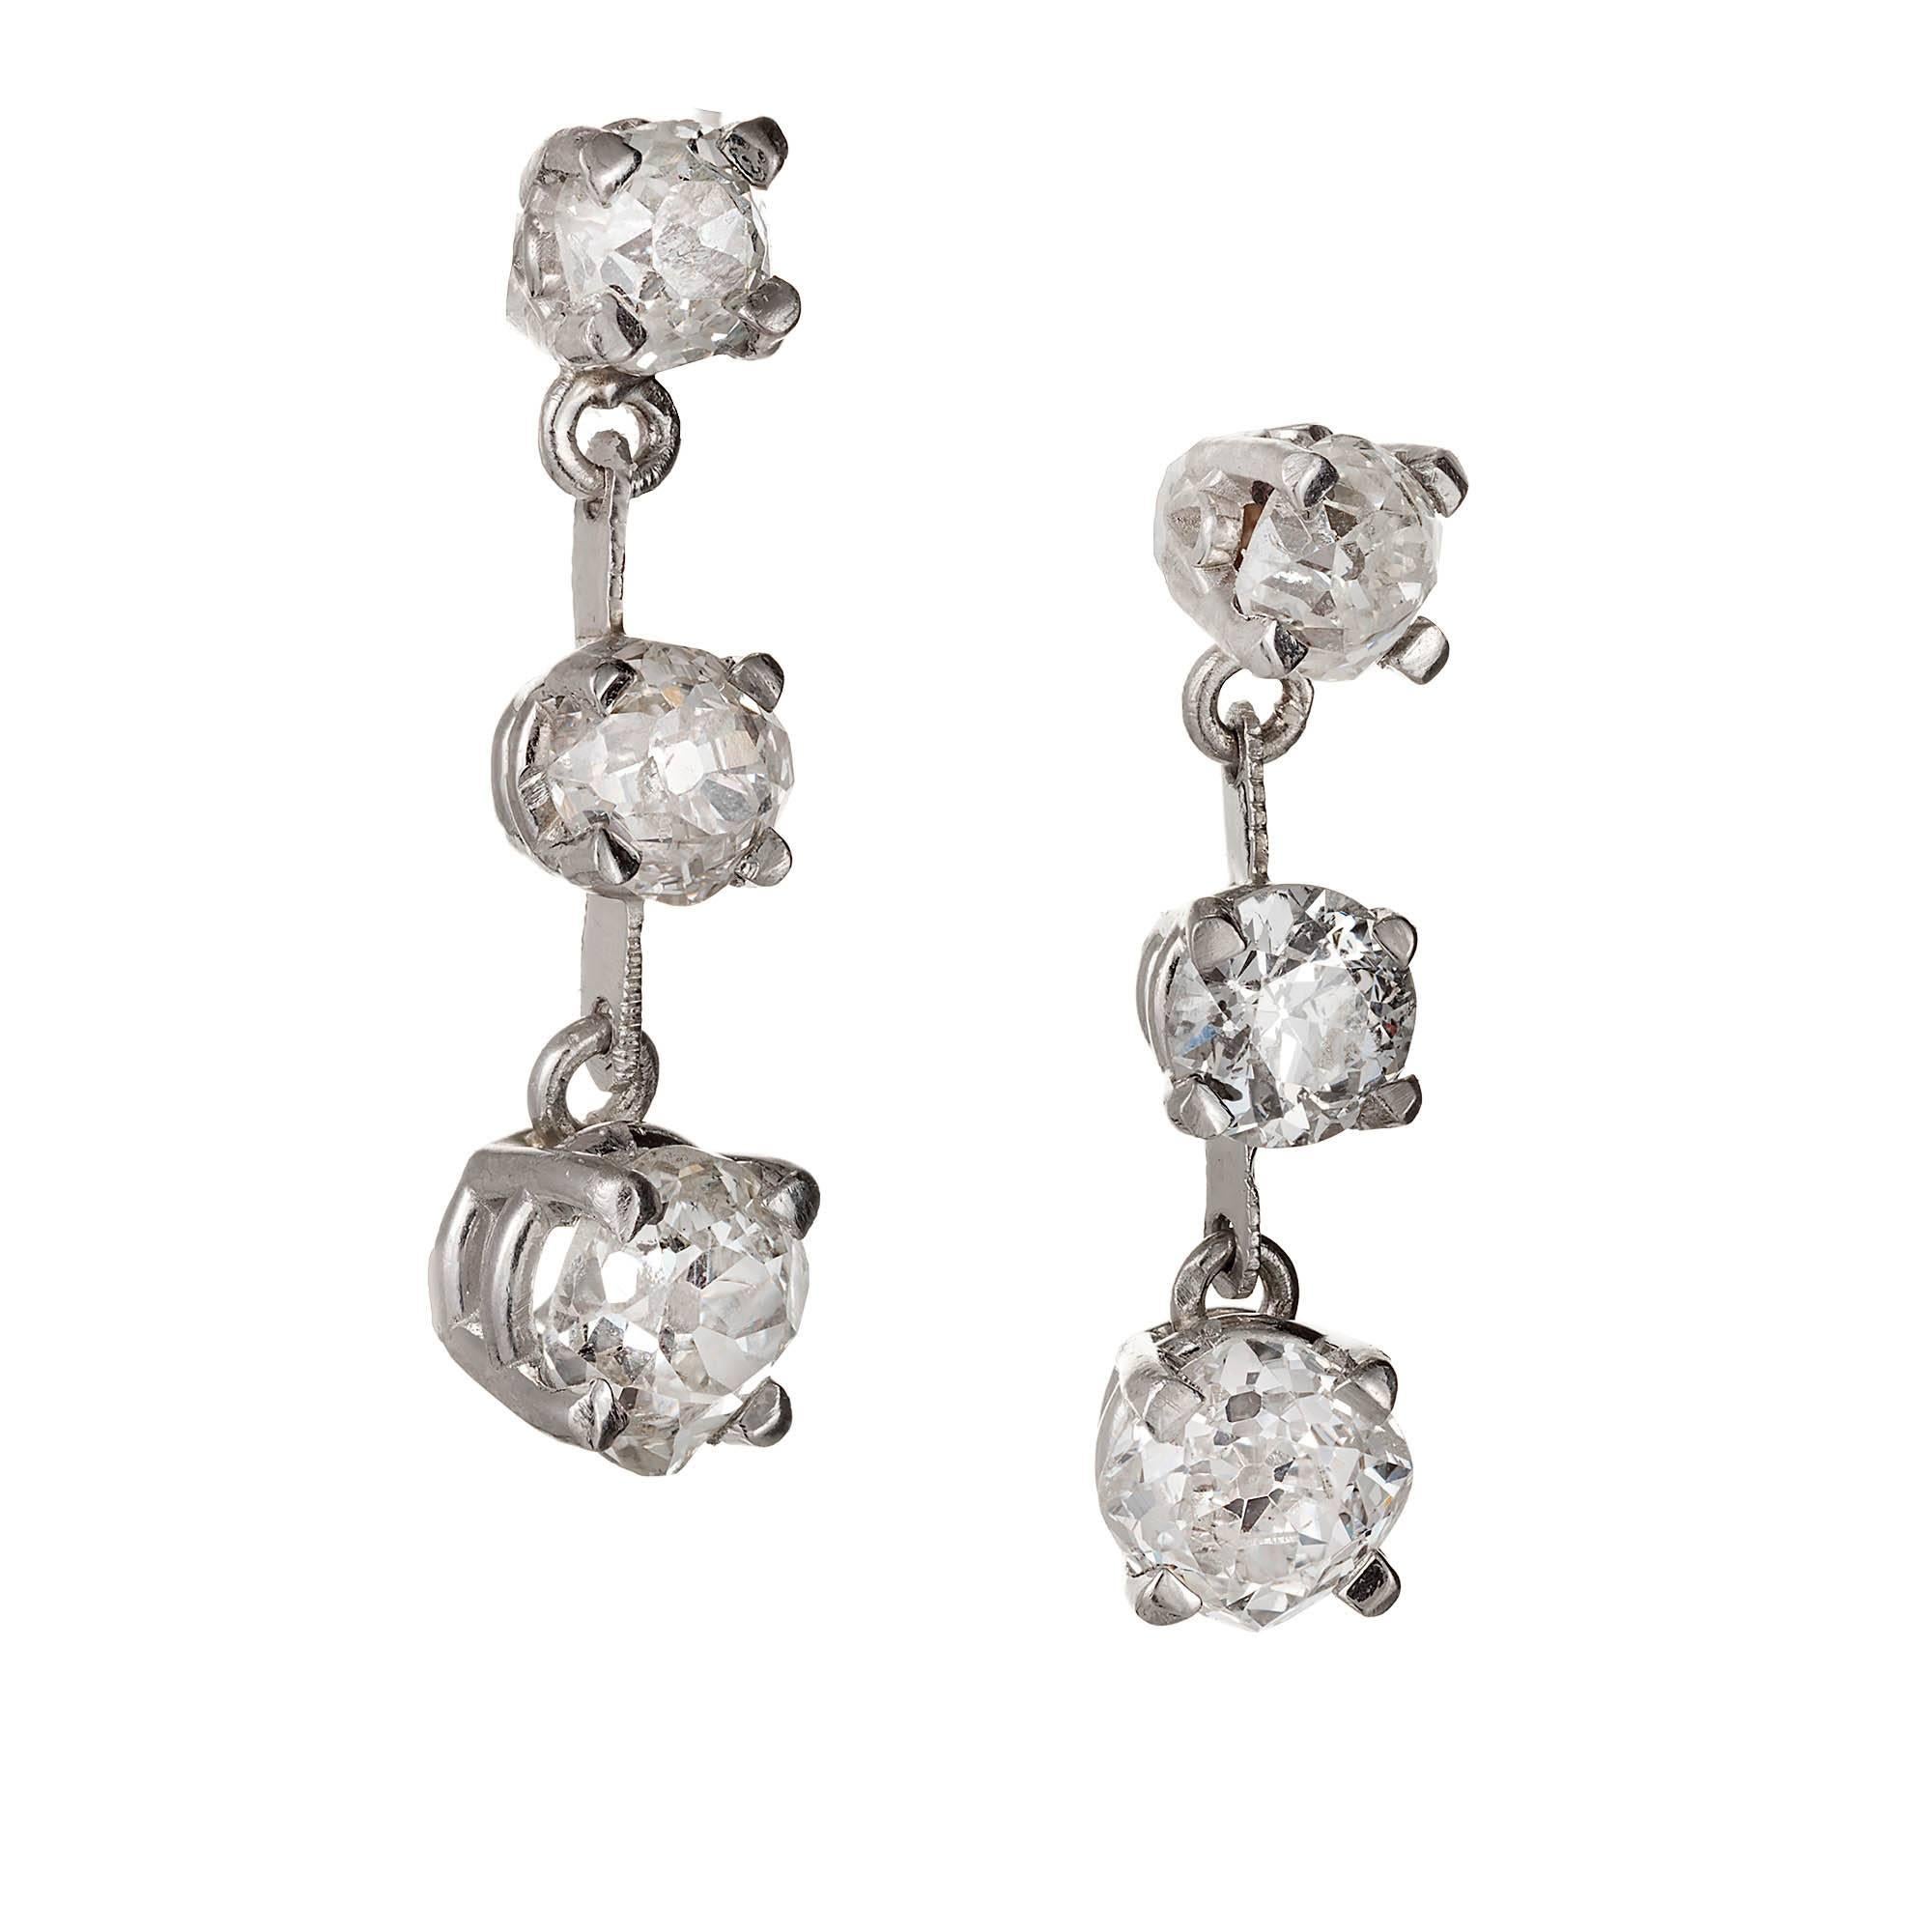 1900's Handmade three section old mine diamond dangle earrings. Made in solid Platinum with simple bar style and very thin dangle sections. Set with bright and shiny old mine cut diamonds. Complete with very raised crowns, small tables, open culets.